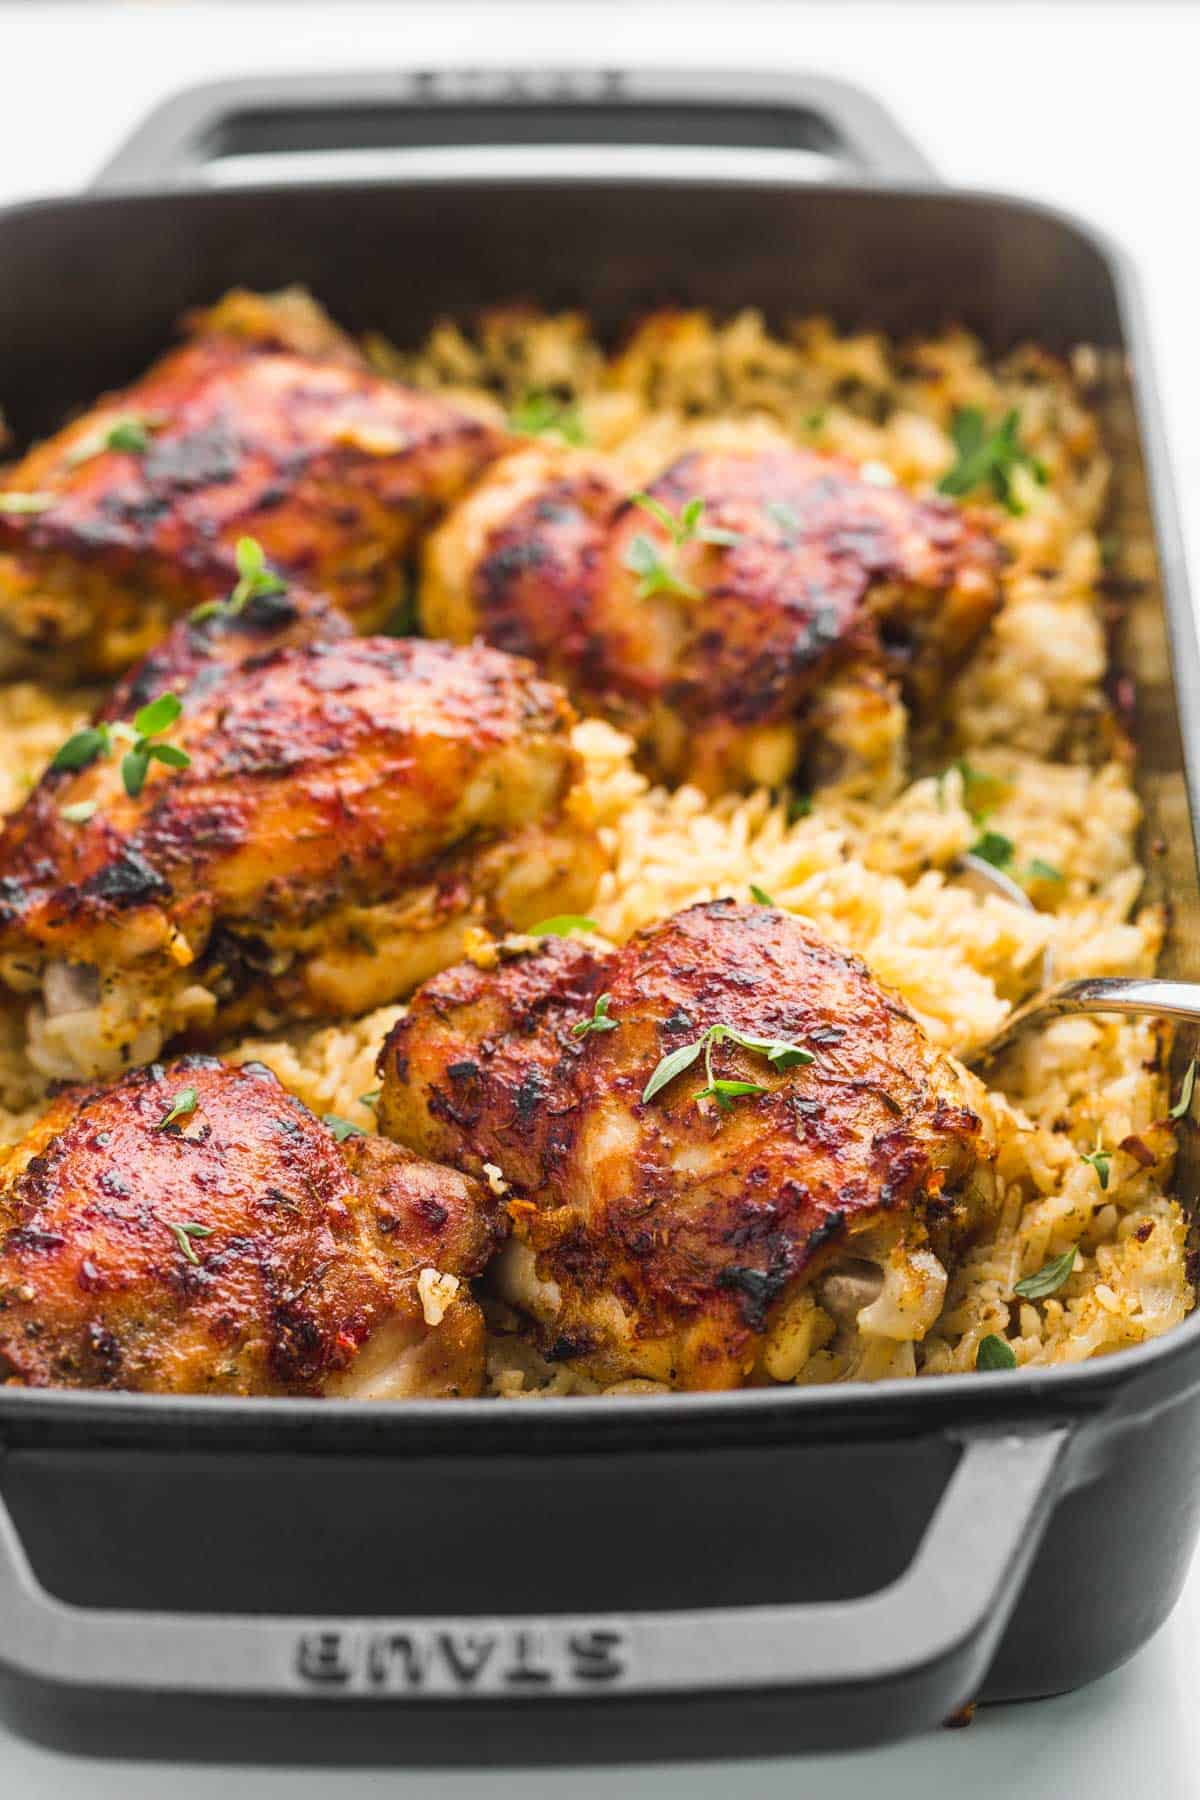 Rice and chicken baked in a Staub cast iron dish